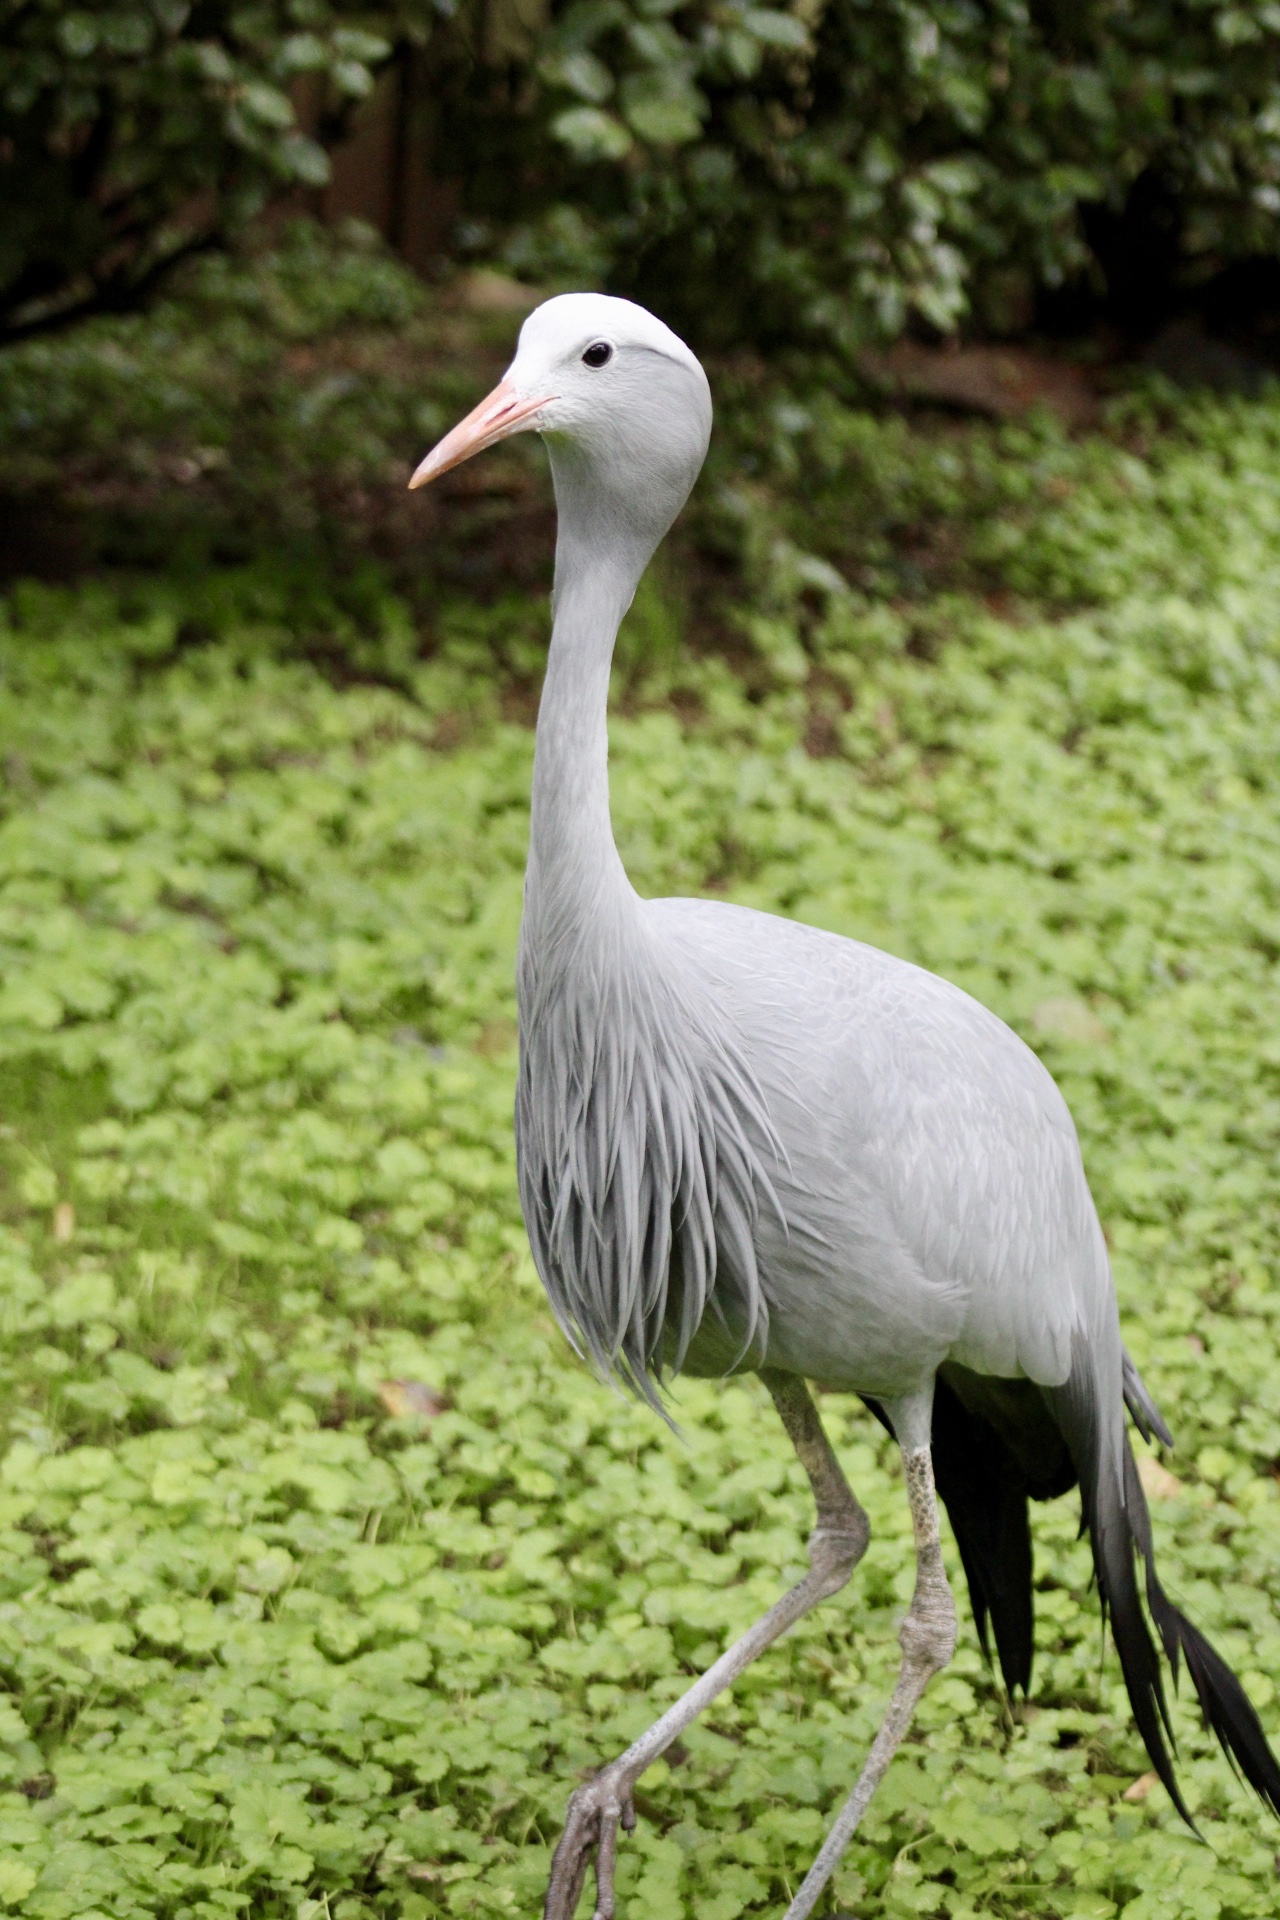 Large grey crane stands in a field of green grass